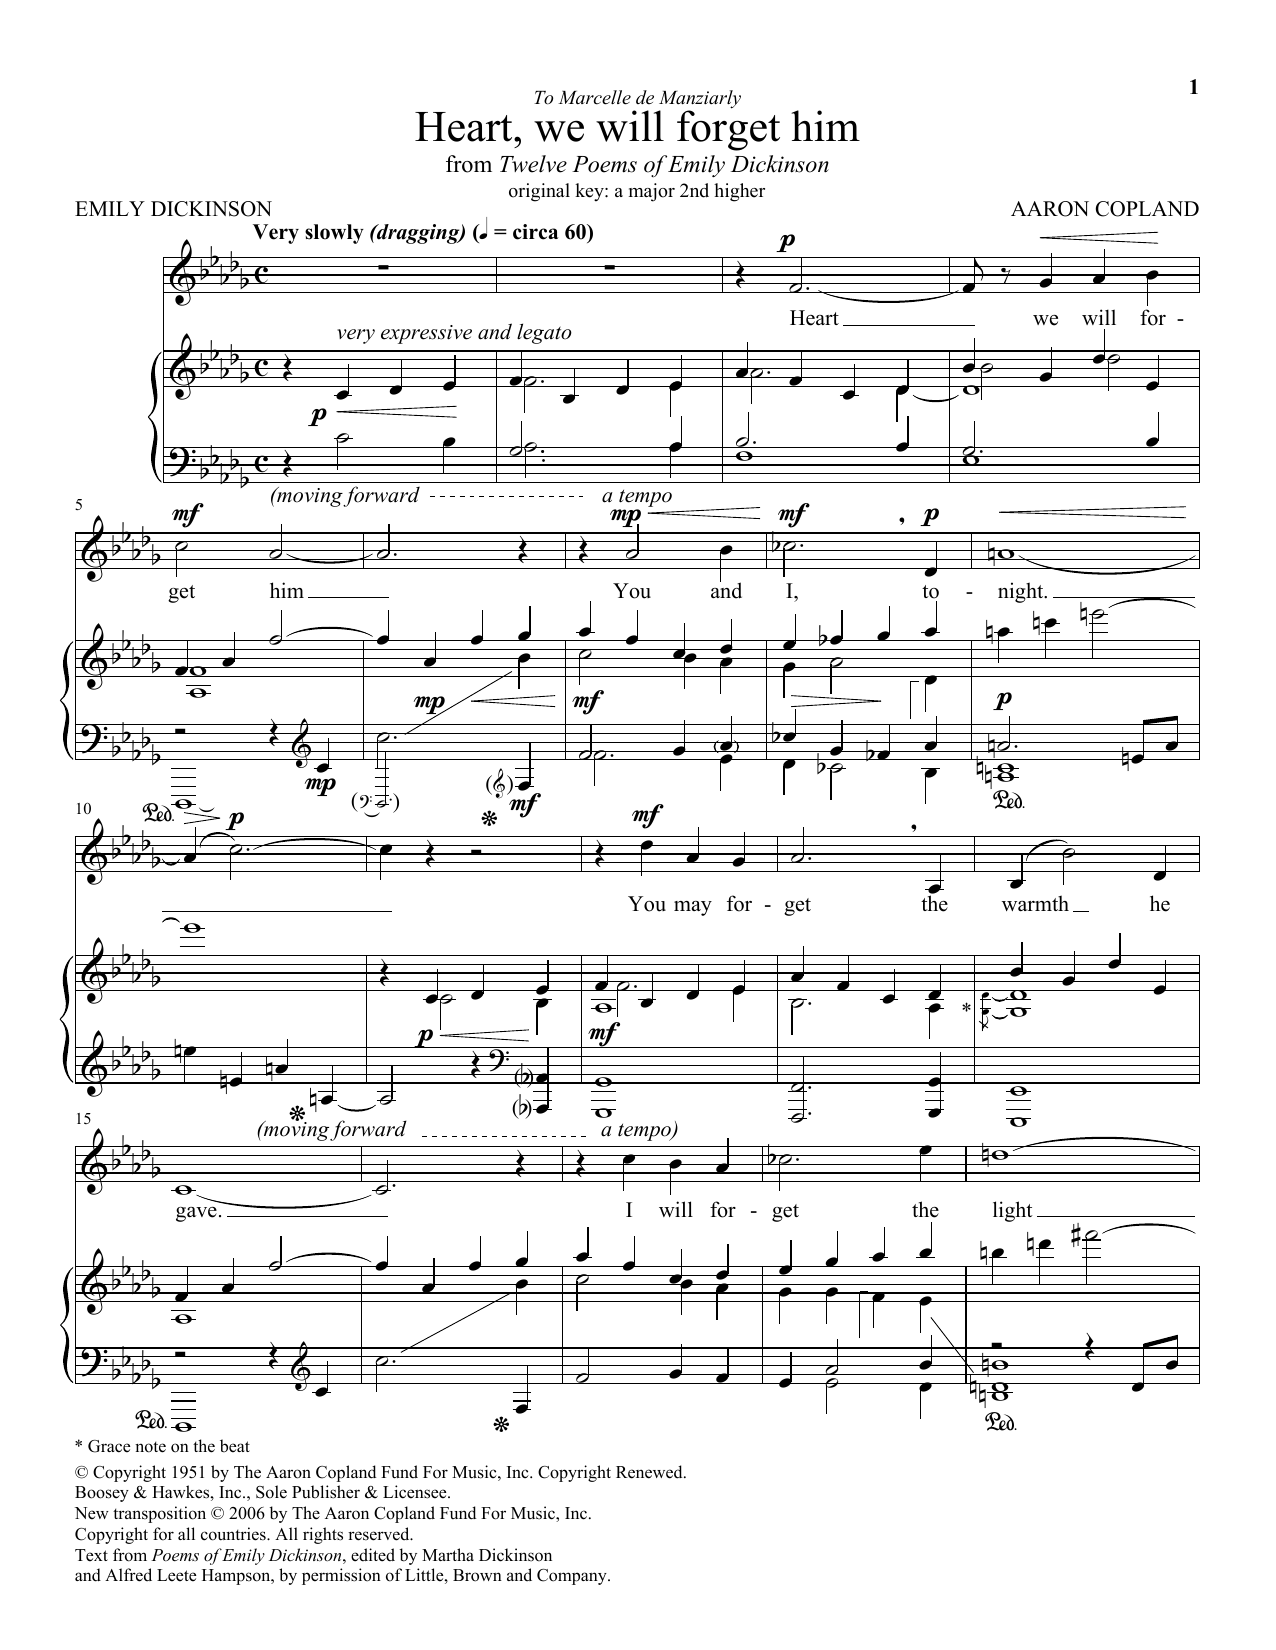 Download Aaron Copland Heart, We Will Forget Him Sheet Music